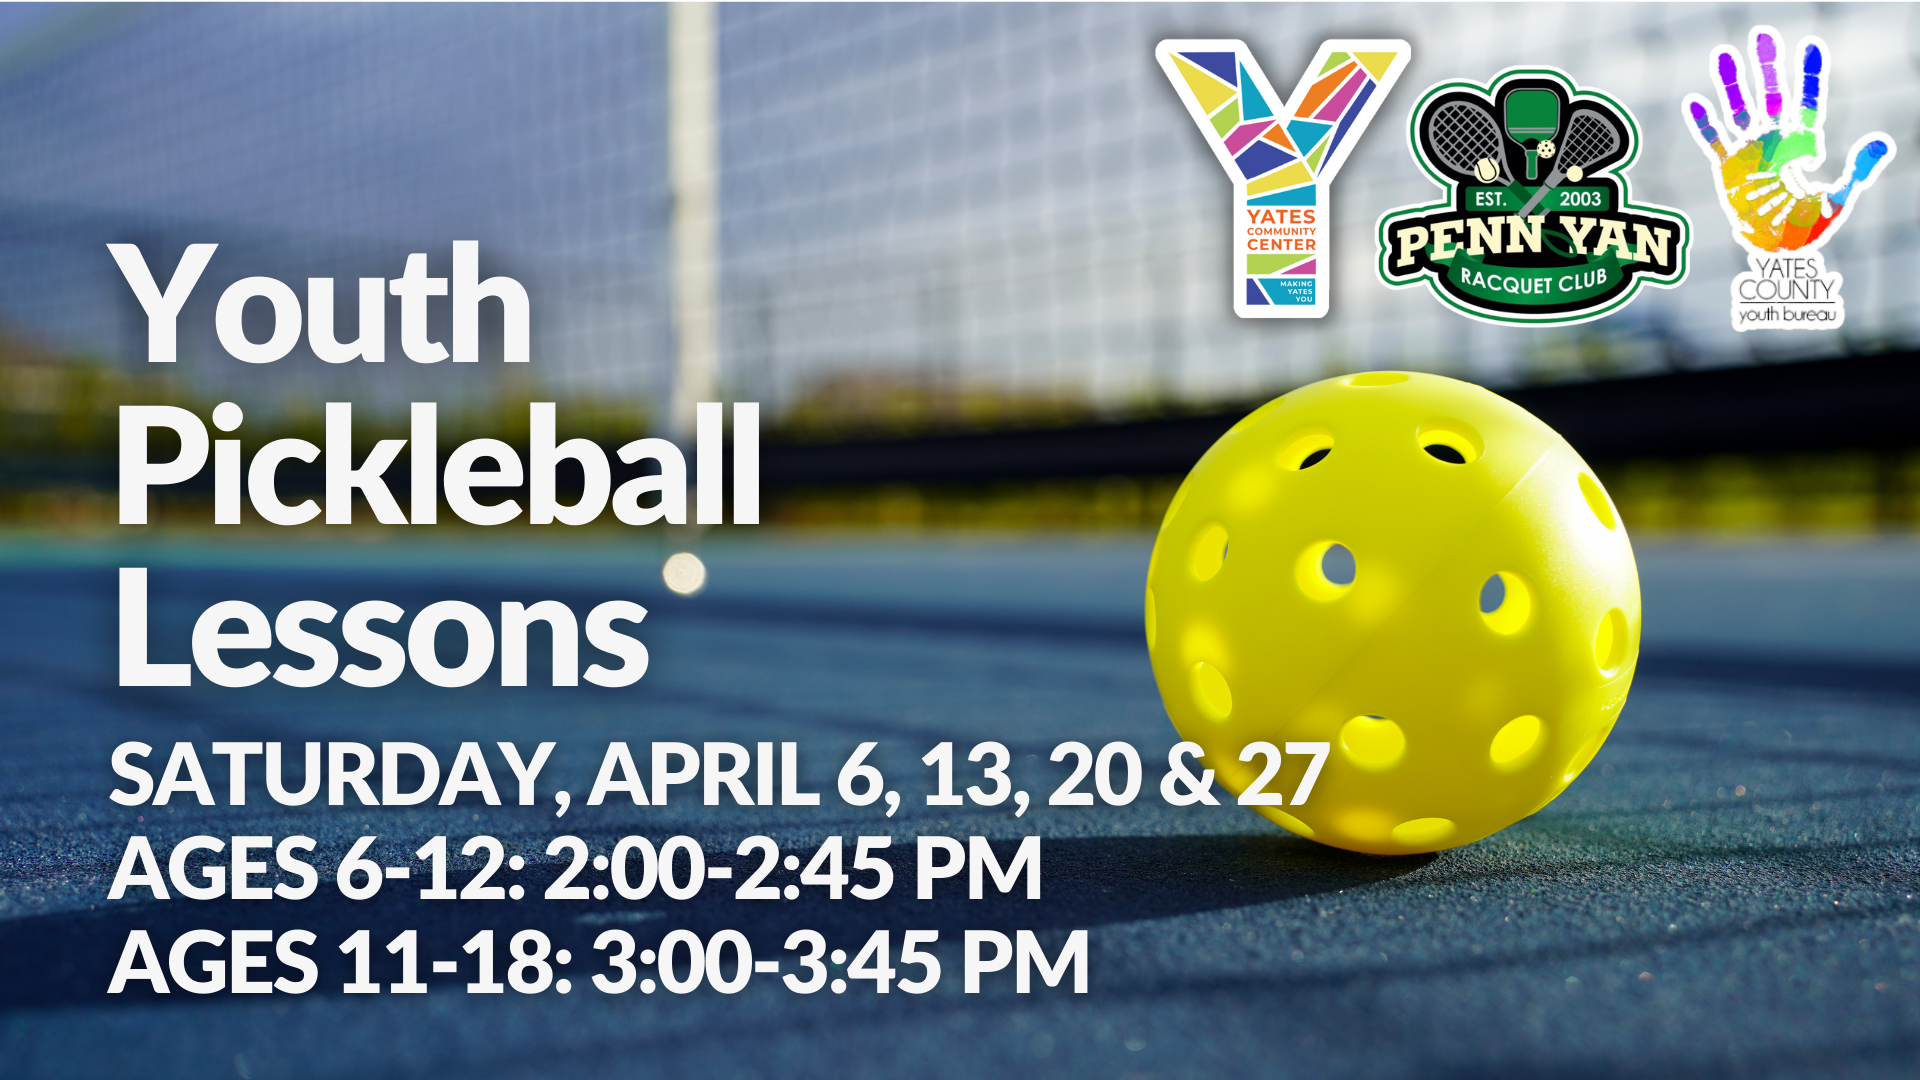 Youth Pickleball Lessons in Penn Yan brought to you by the Yates Community Center.